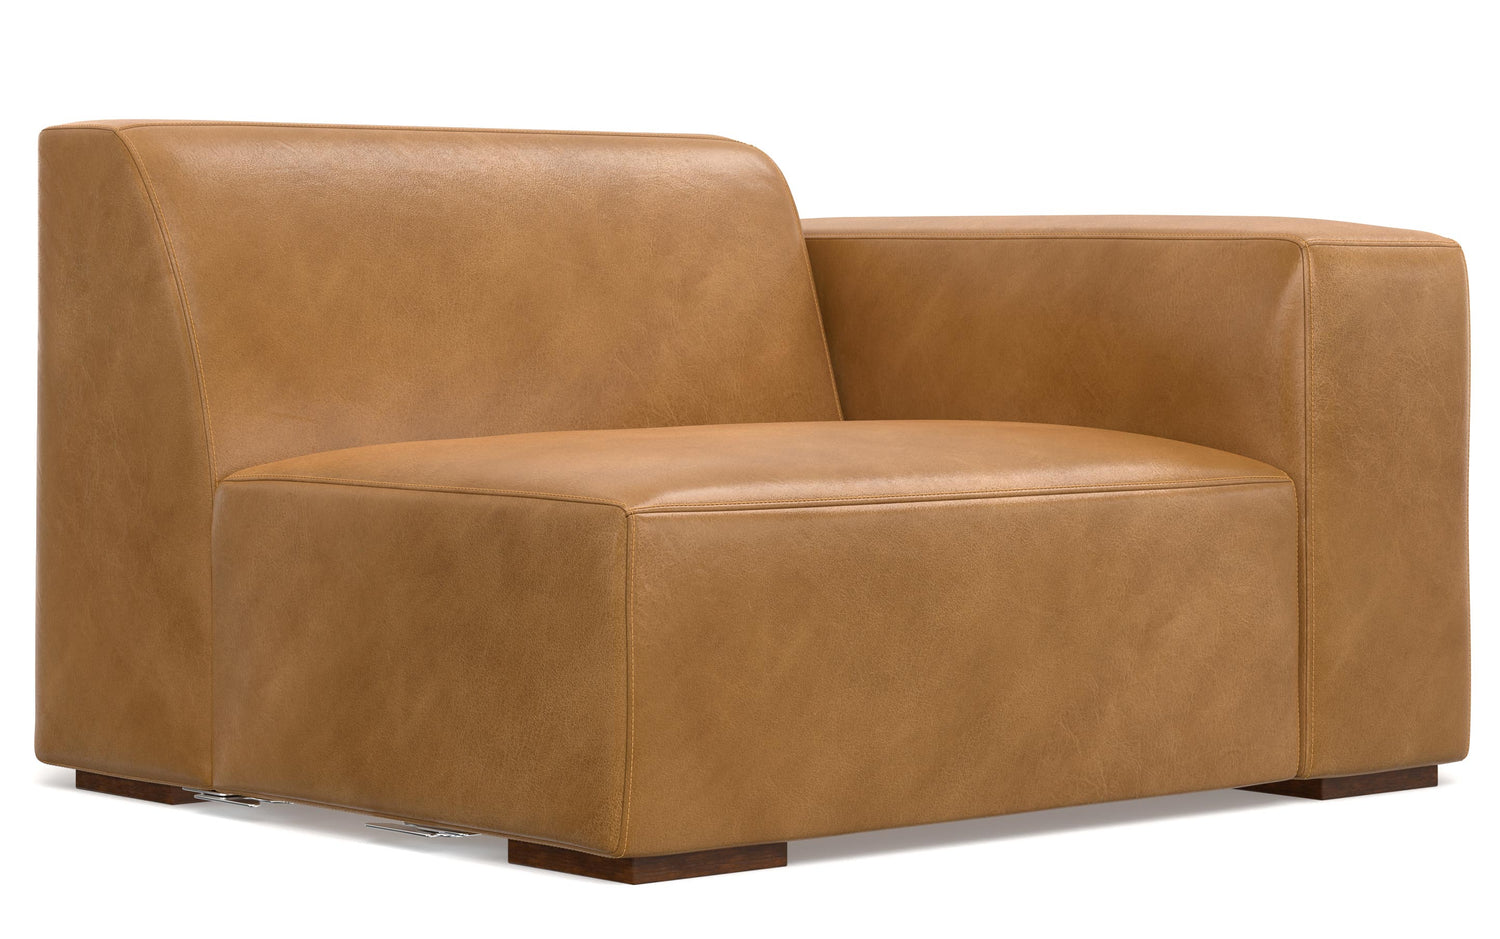 Sienna Genuine Leather | Rex 2 Seater Sofa in Genuine Leather